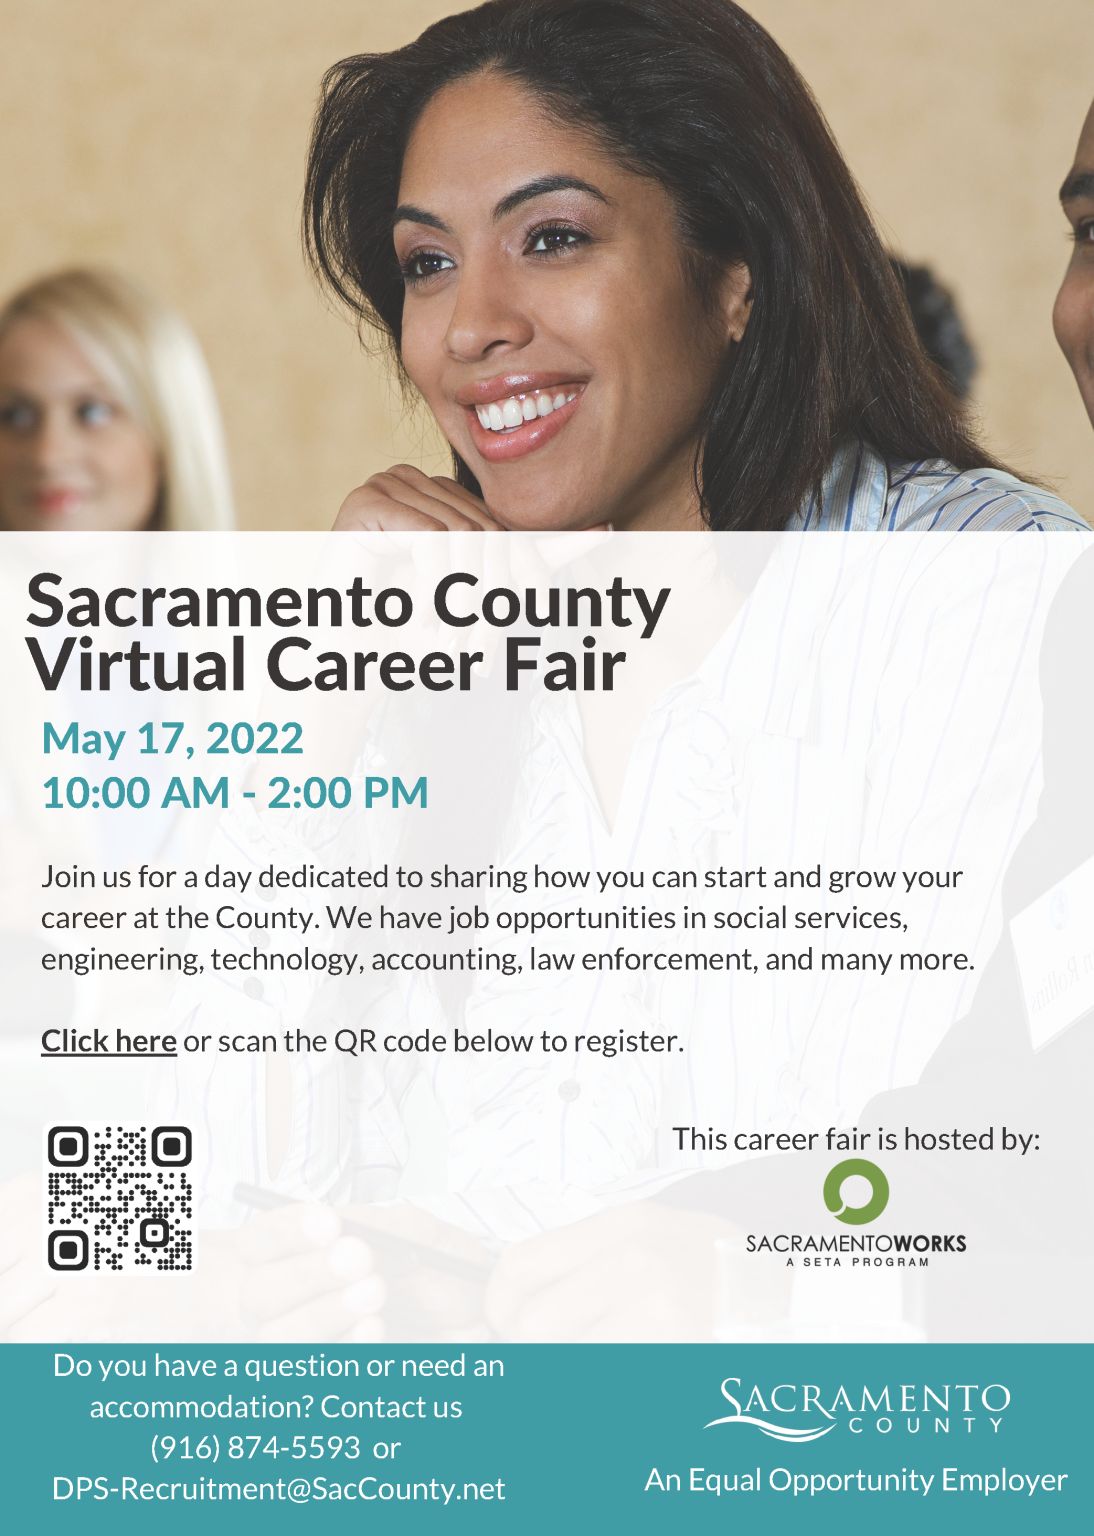 solano-community-college-career-center-posted-on-linkedin